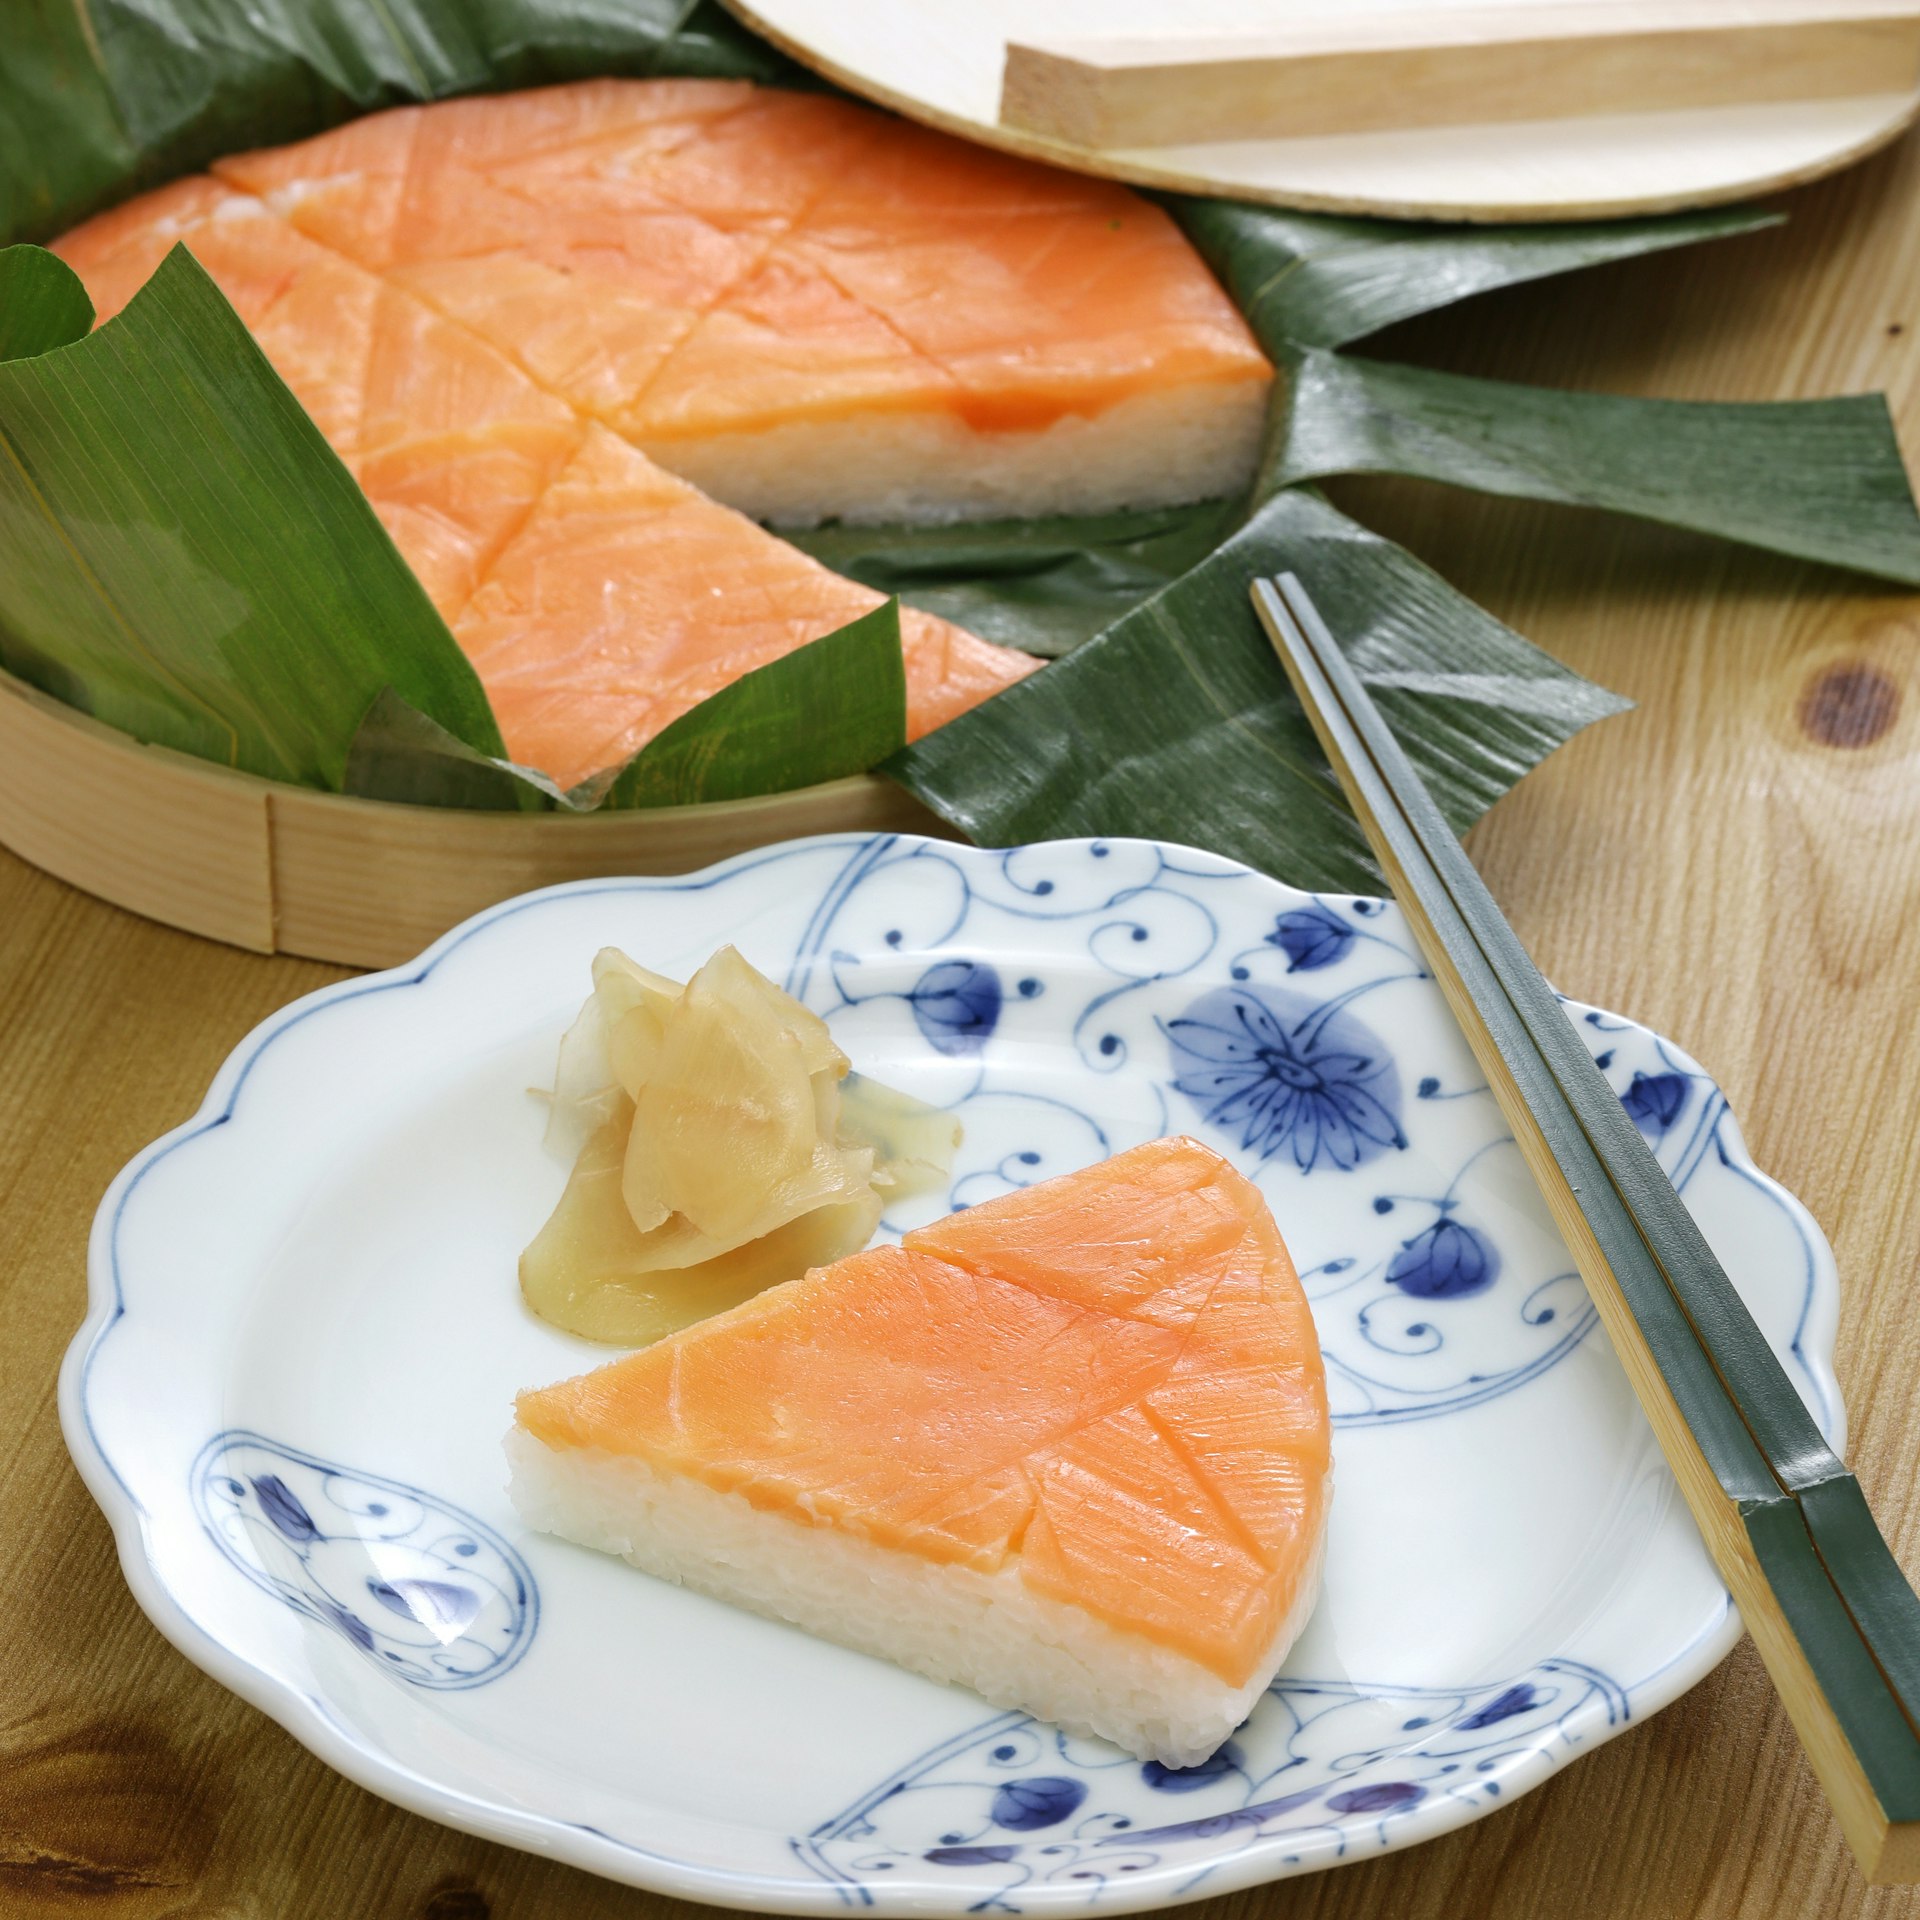 Masu zushi, Pressed trout salmon sushi wrapped in bamboo leaves, a specialty of Toyama, Japan